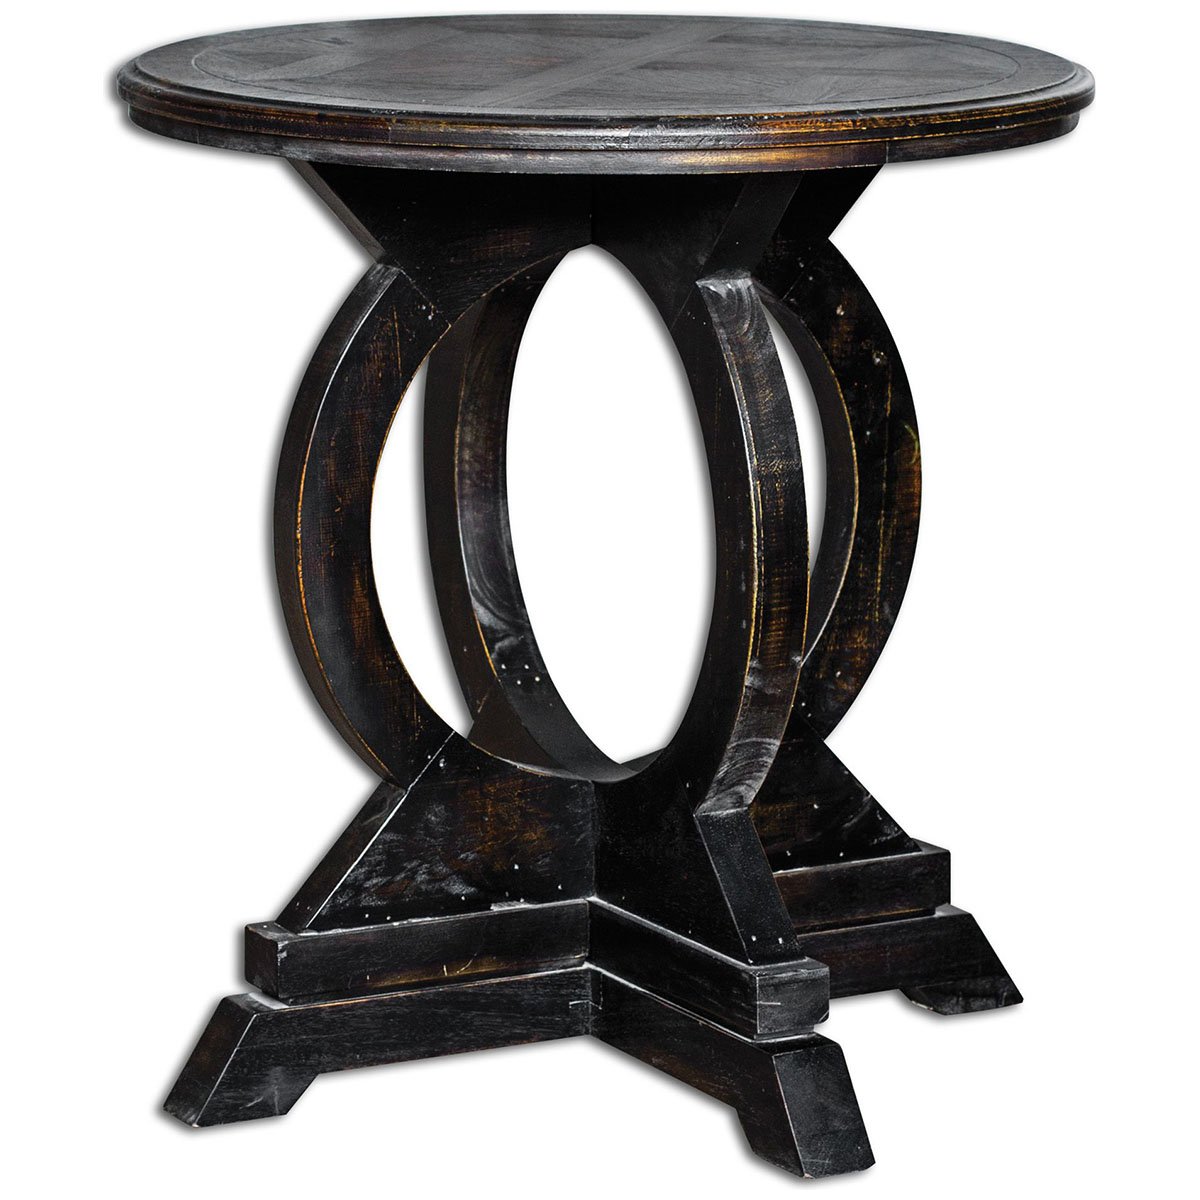 uttermost maiva accent table black kitchen dining round iron mudroom furniture high bedside owings console shelf espresso interior ideas reclaimed wood nesting tables west elm